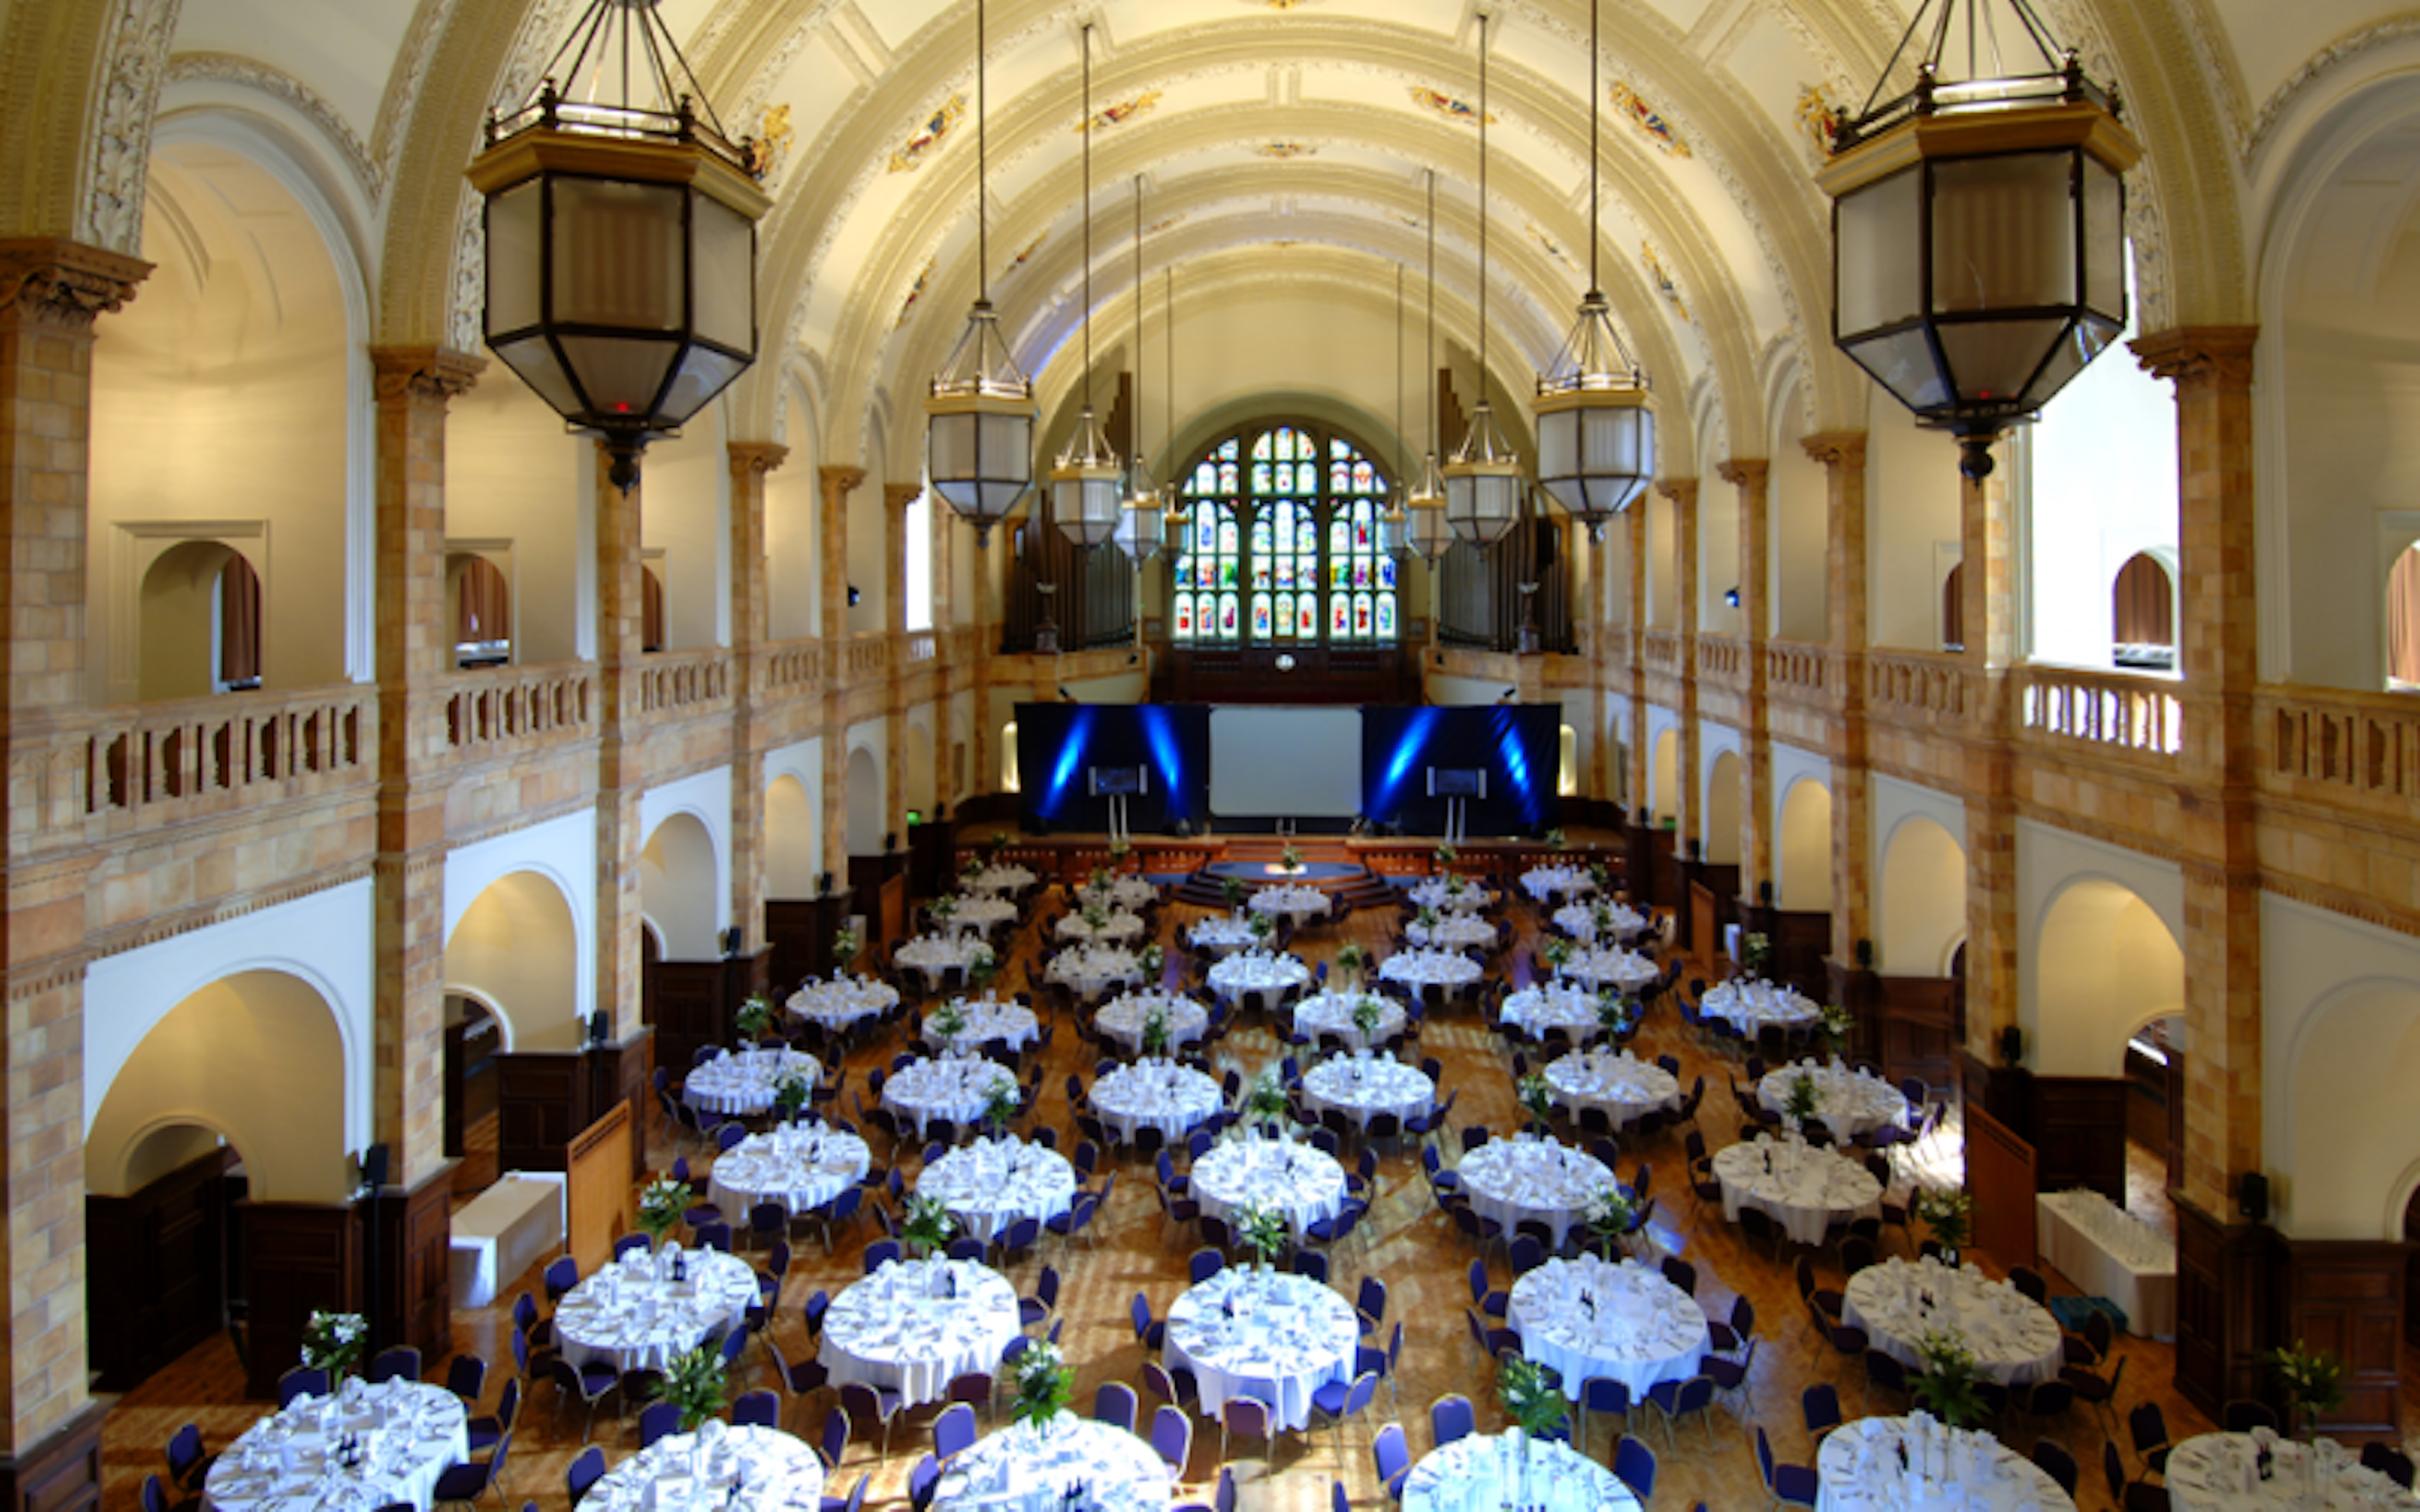 The Great Hall at the University of Birmingham - image